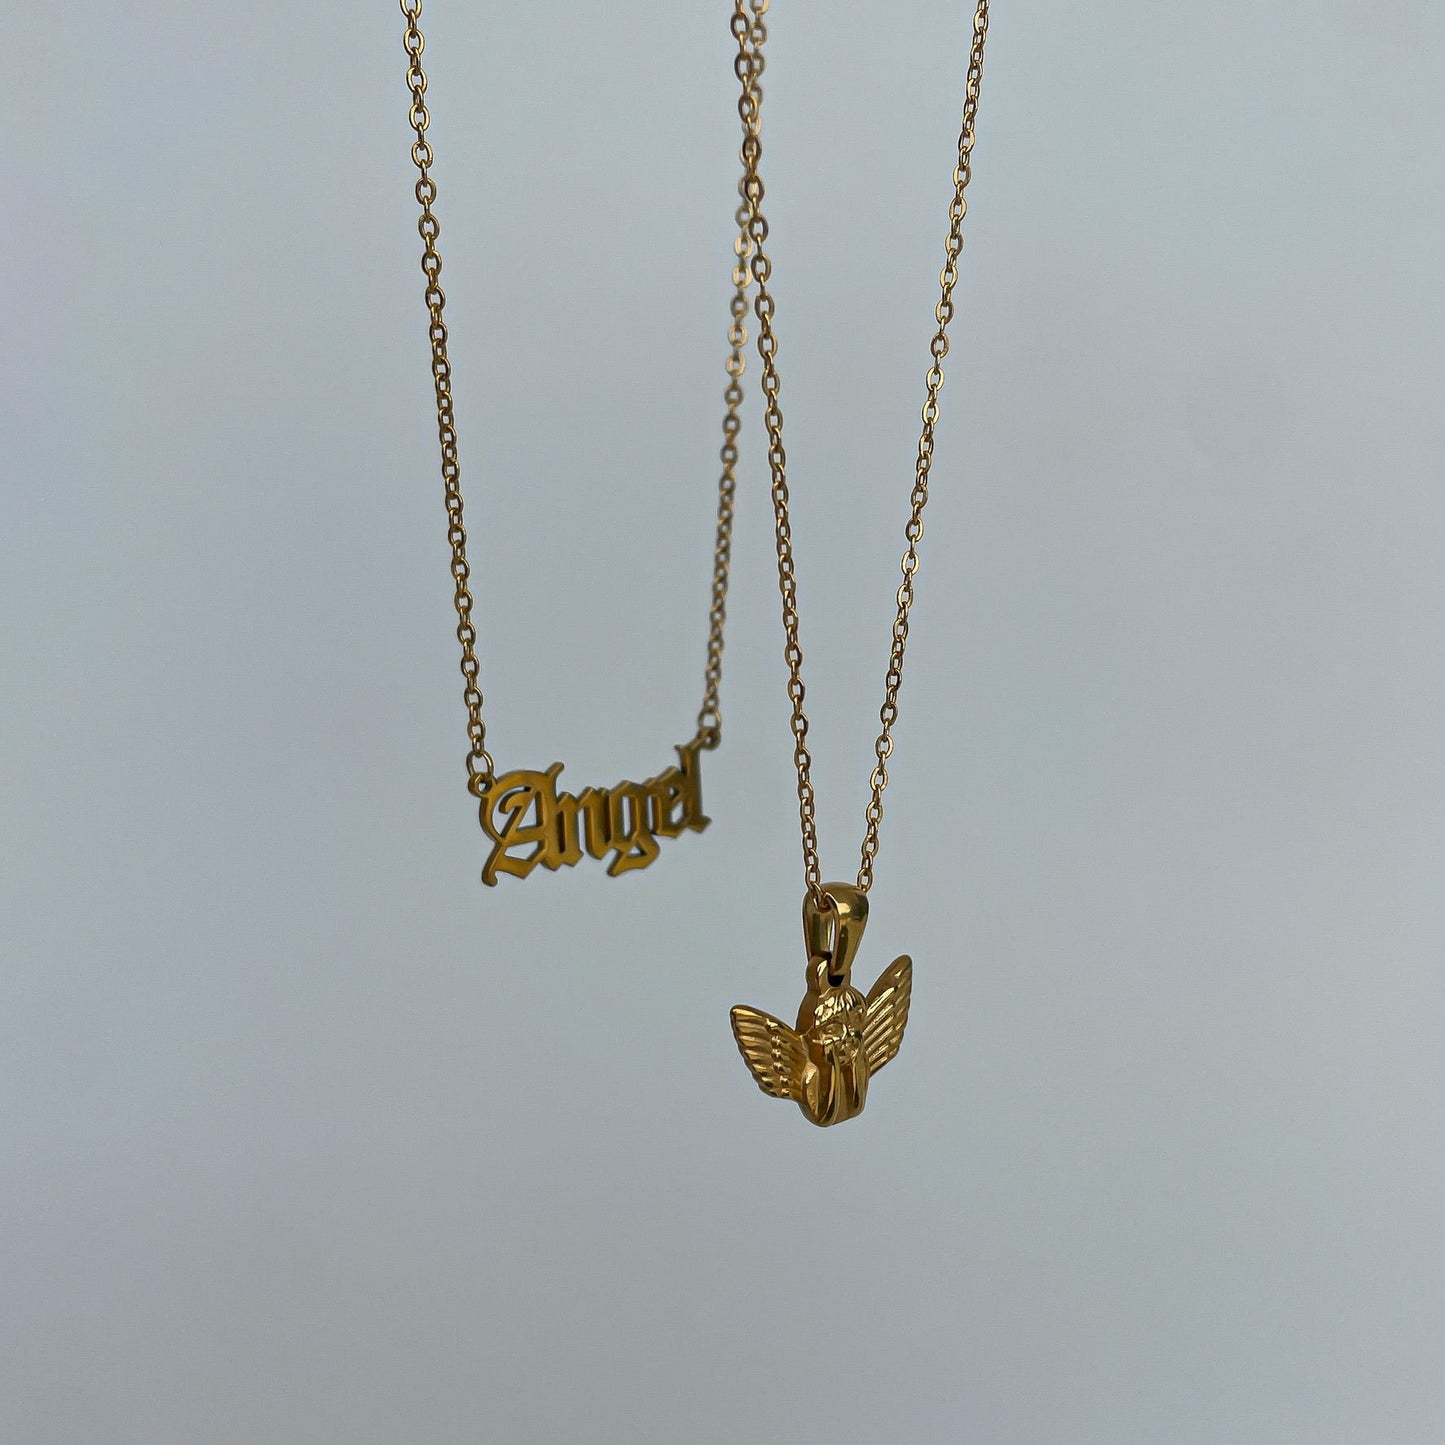 Angel necklace(2セット) - 𝐇𝐨𝐧𝐞𝐲 𝐁𝐮𝐭𝐭𝐞𝐫 𝐍𝐢𝐧𝐞